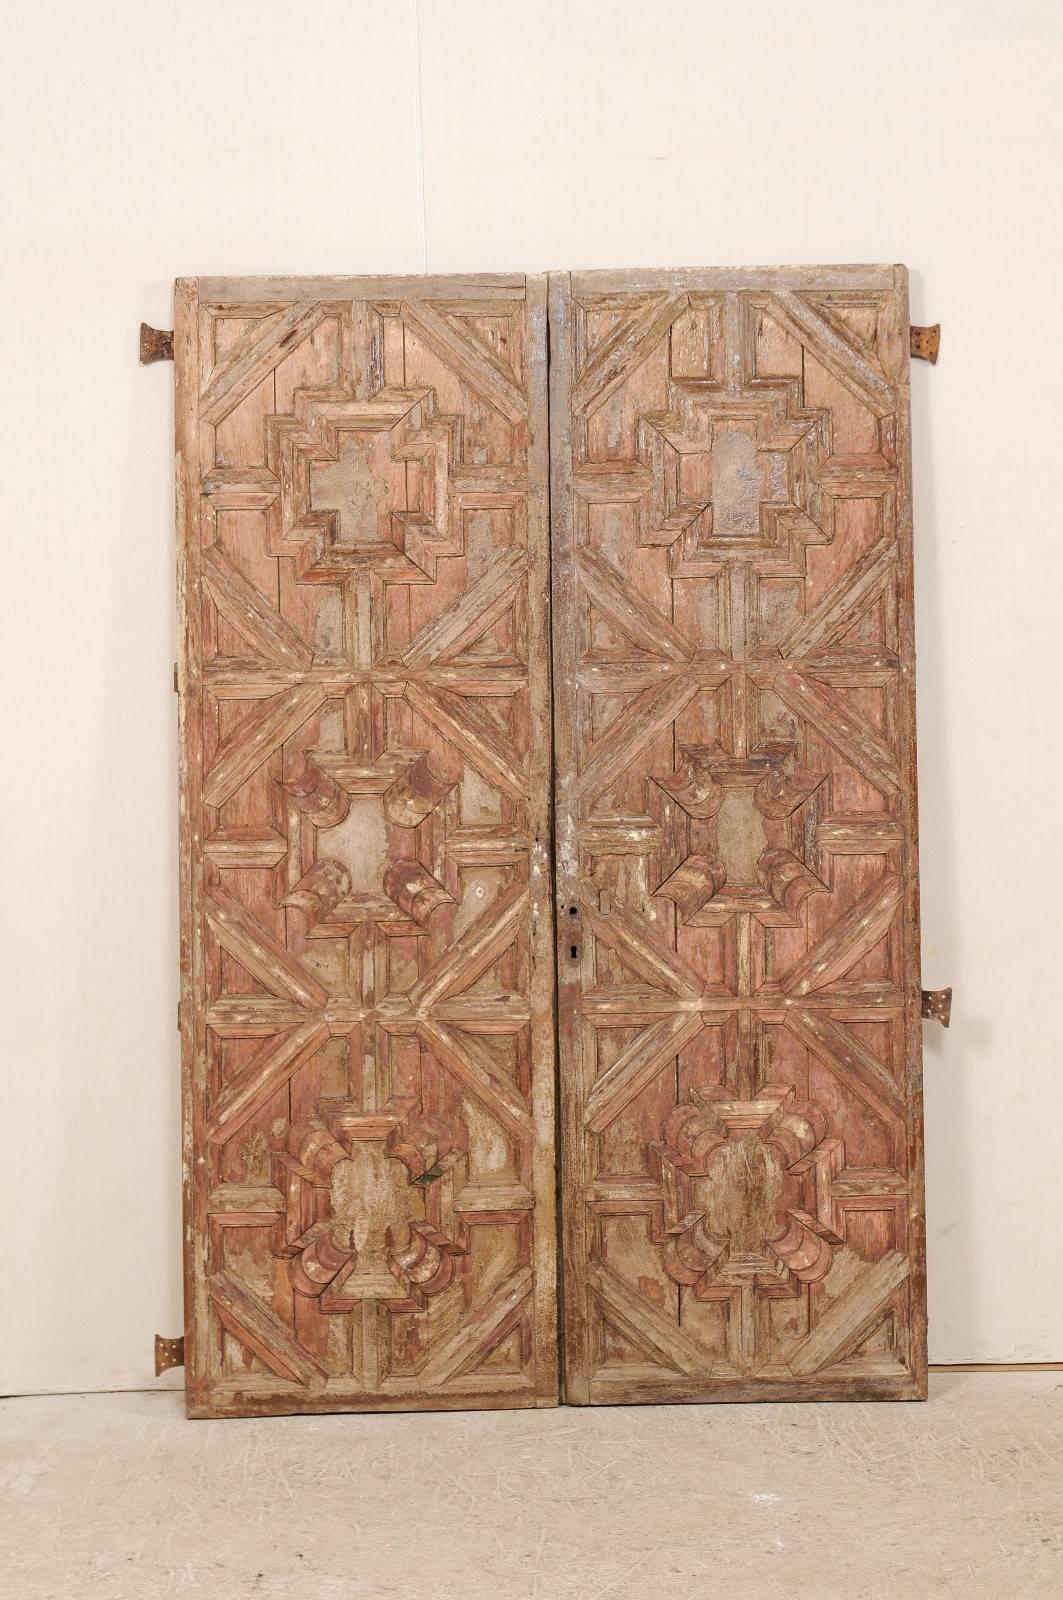 A pair of 18th century Spanish wood carved doors. This pair of antique Spanish doors feature intricately carved and recess front panels on their front sides, with a geometric pattern. Their backsides are not carved, and have simple, clean lines. The